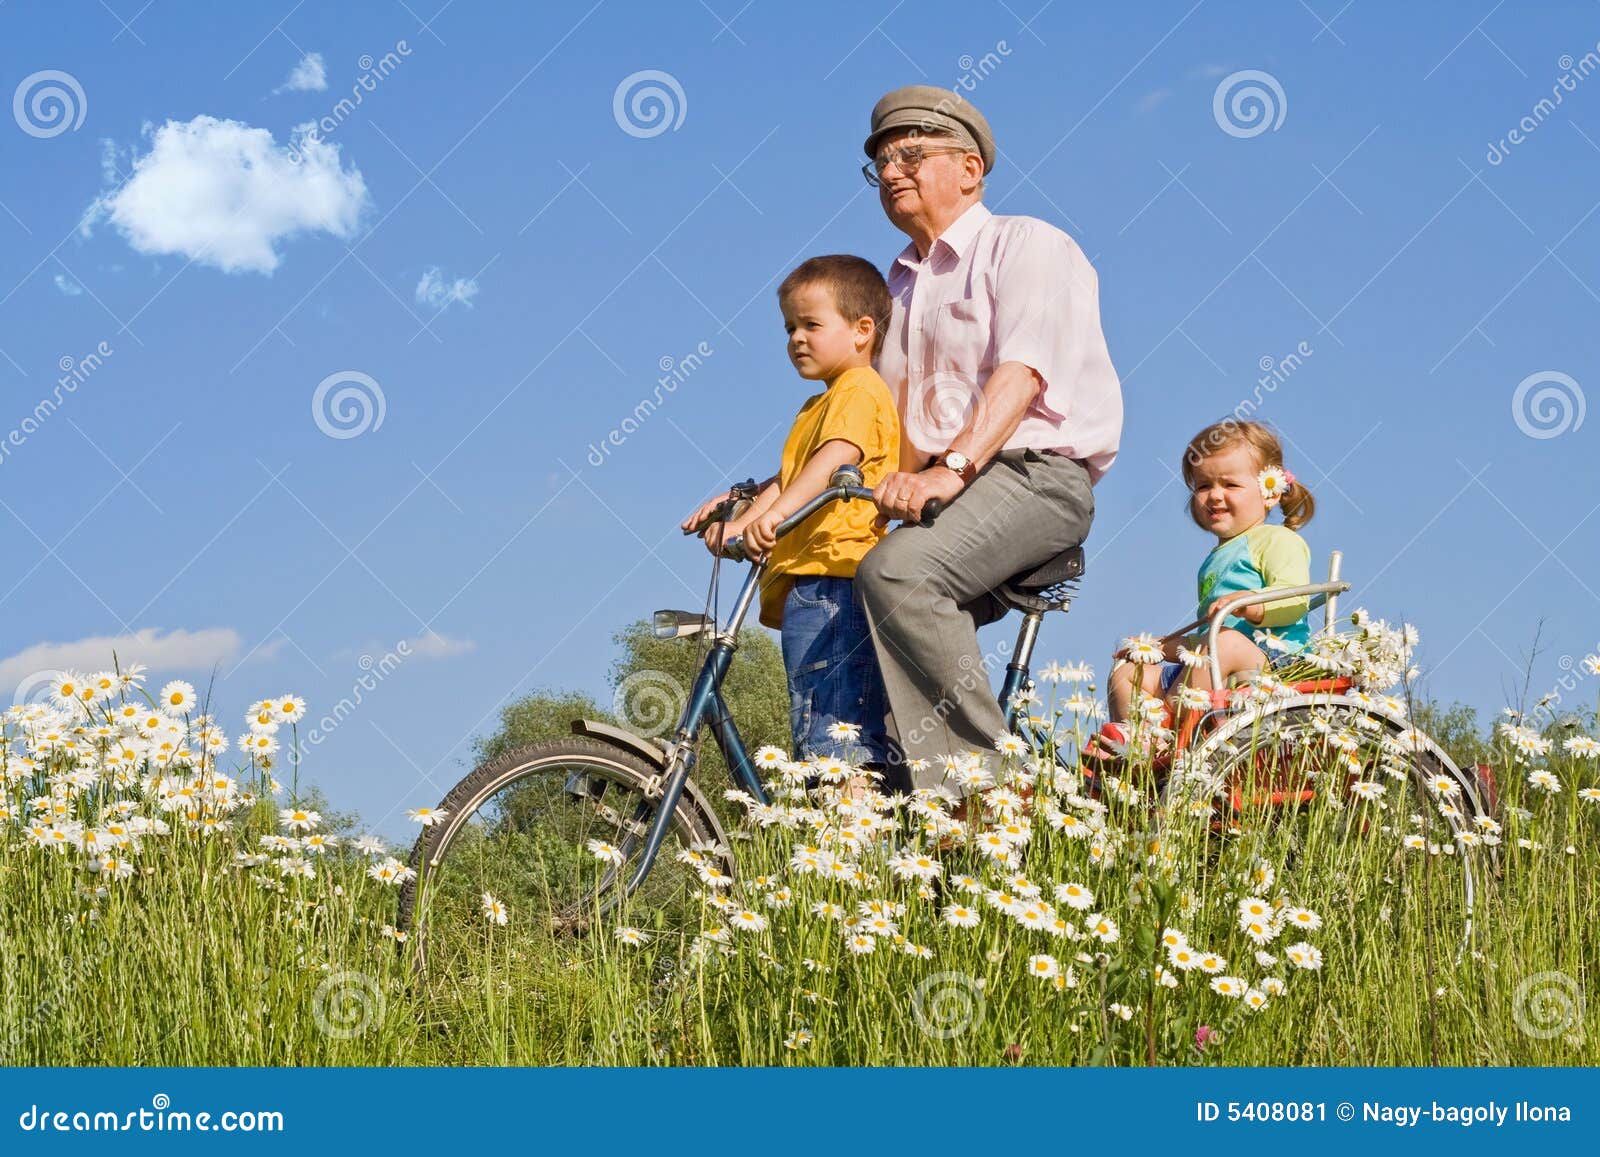 Riding With Grandpa On A Bike Stock Image Image Of